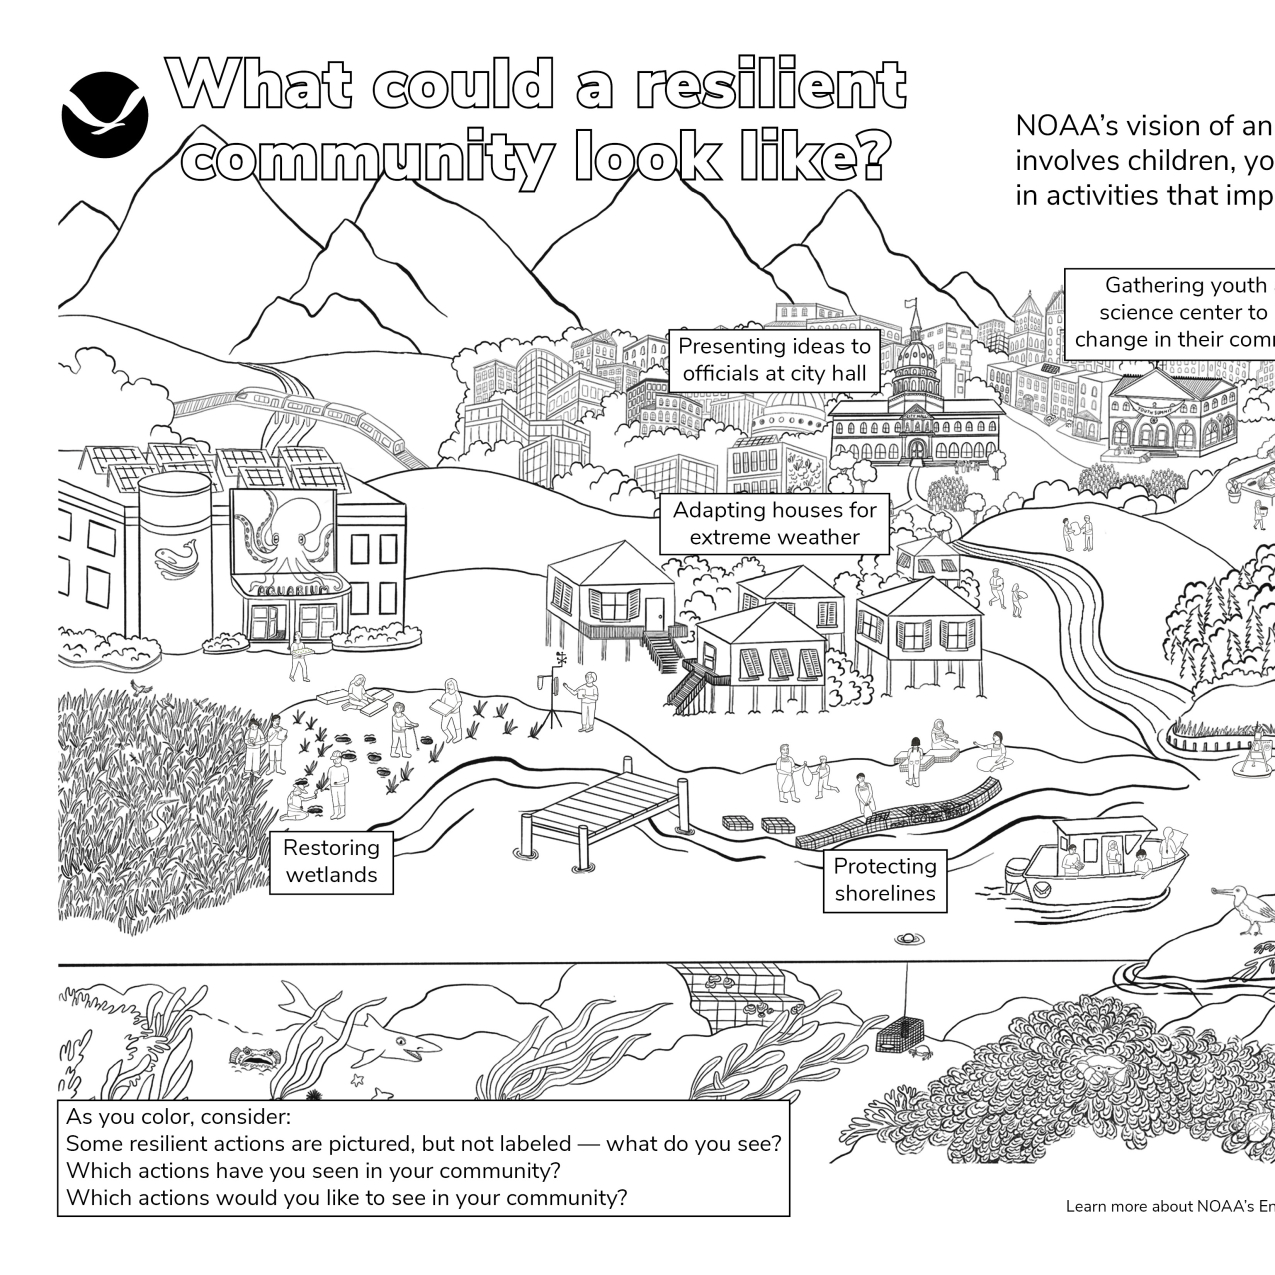 Line art illustration of the NOAA Environmental Literacy Program's Vision of A Resilient Community depicting a city along a coast and river. For an accessible version, please explore the PDF found at: https://www.noaa.gov/education/multimedia/photos-images/community-resilience-coloring-page